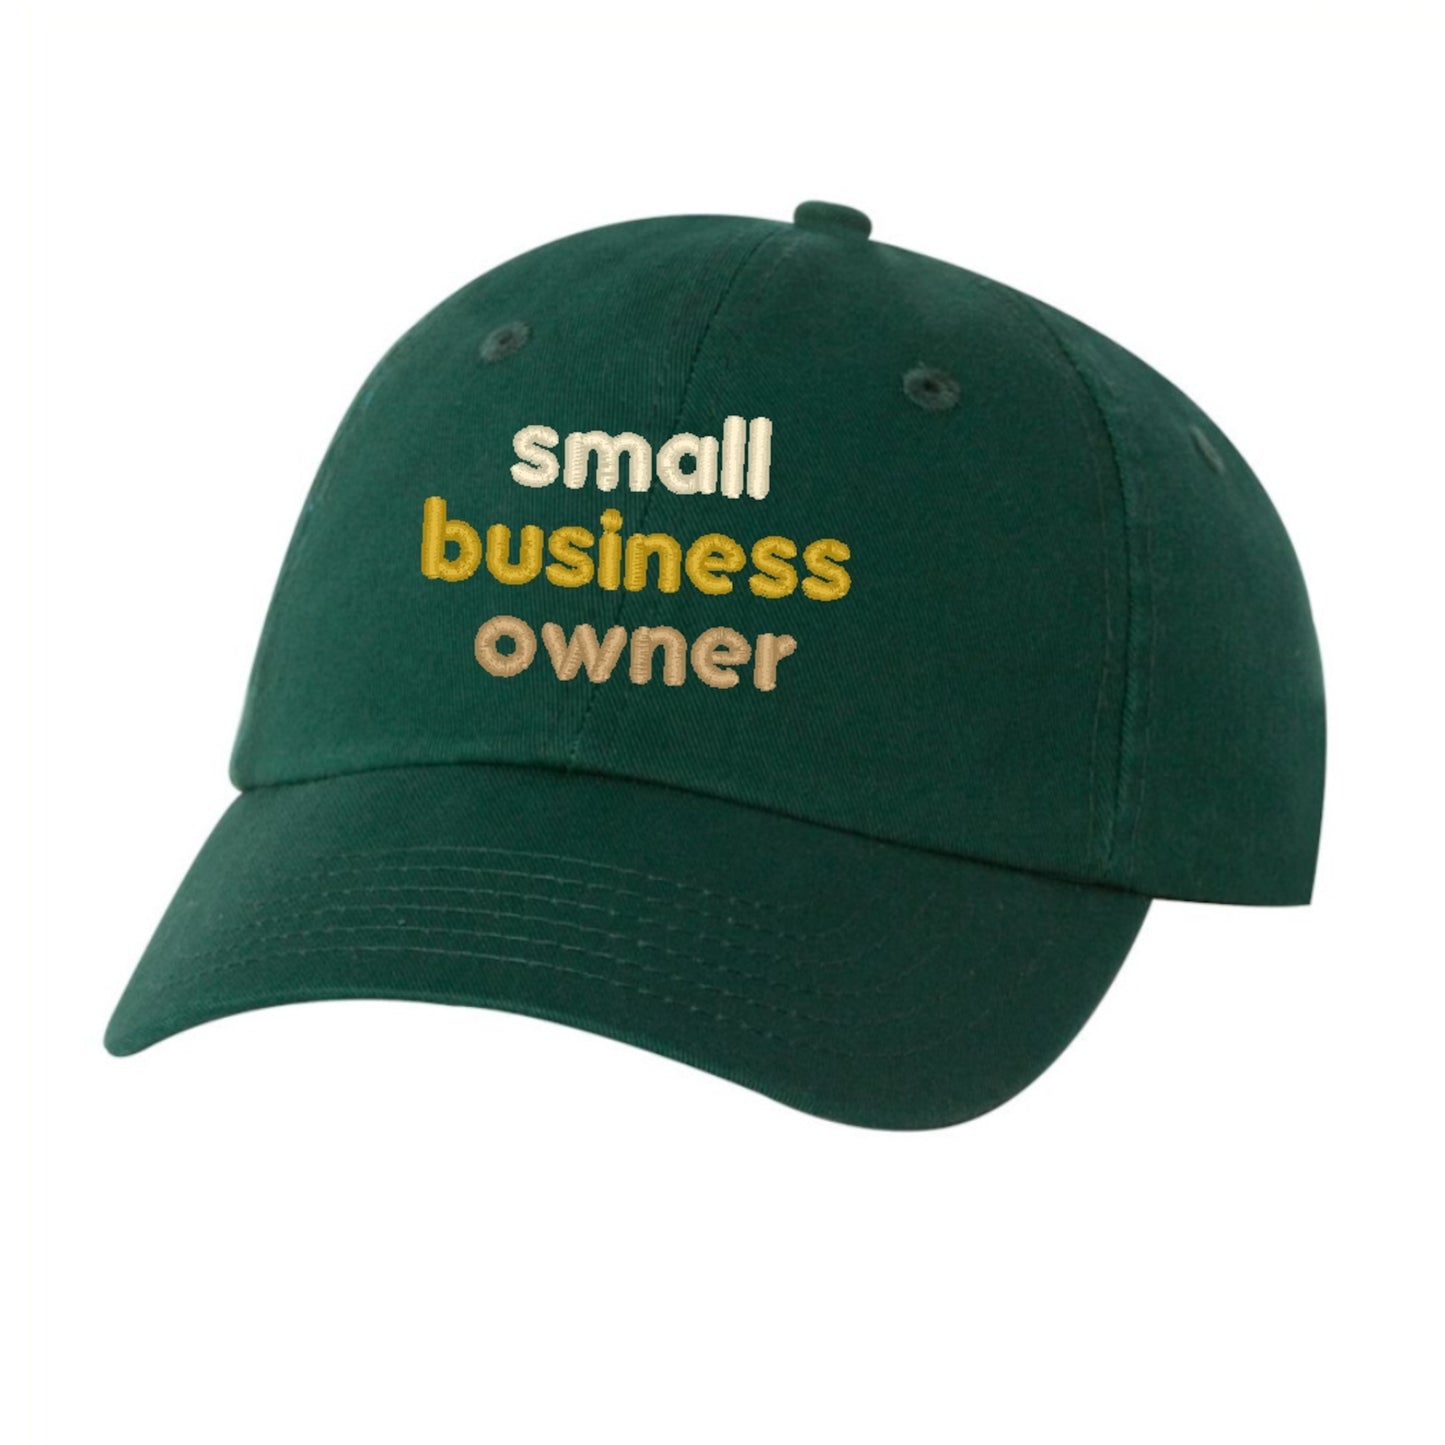 Small Business Owner - Classic Dad Hat - Several Colors